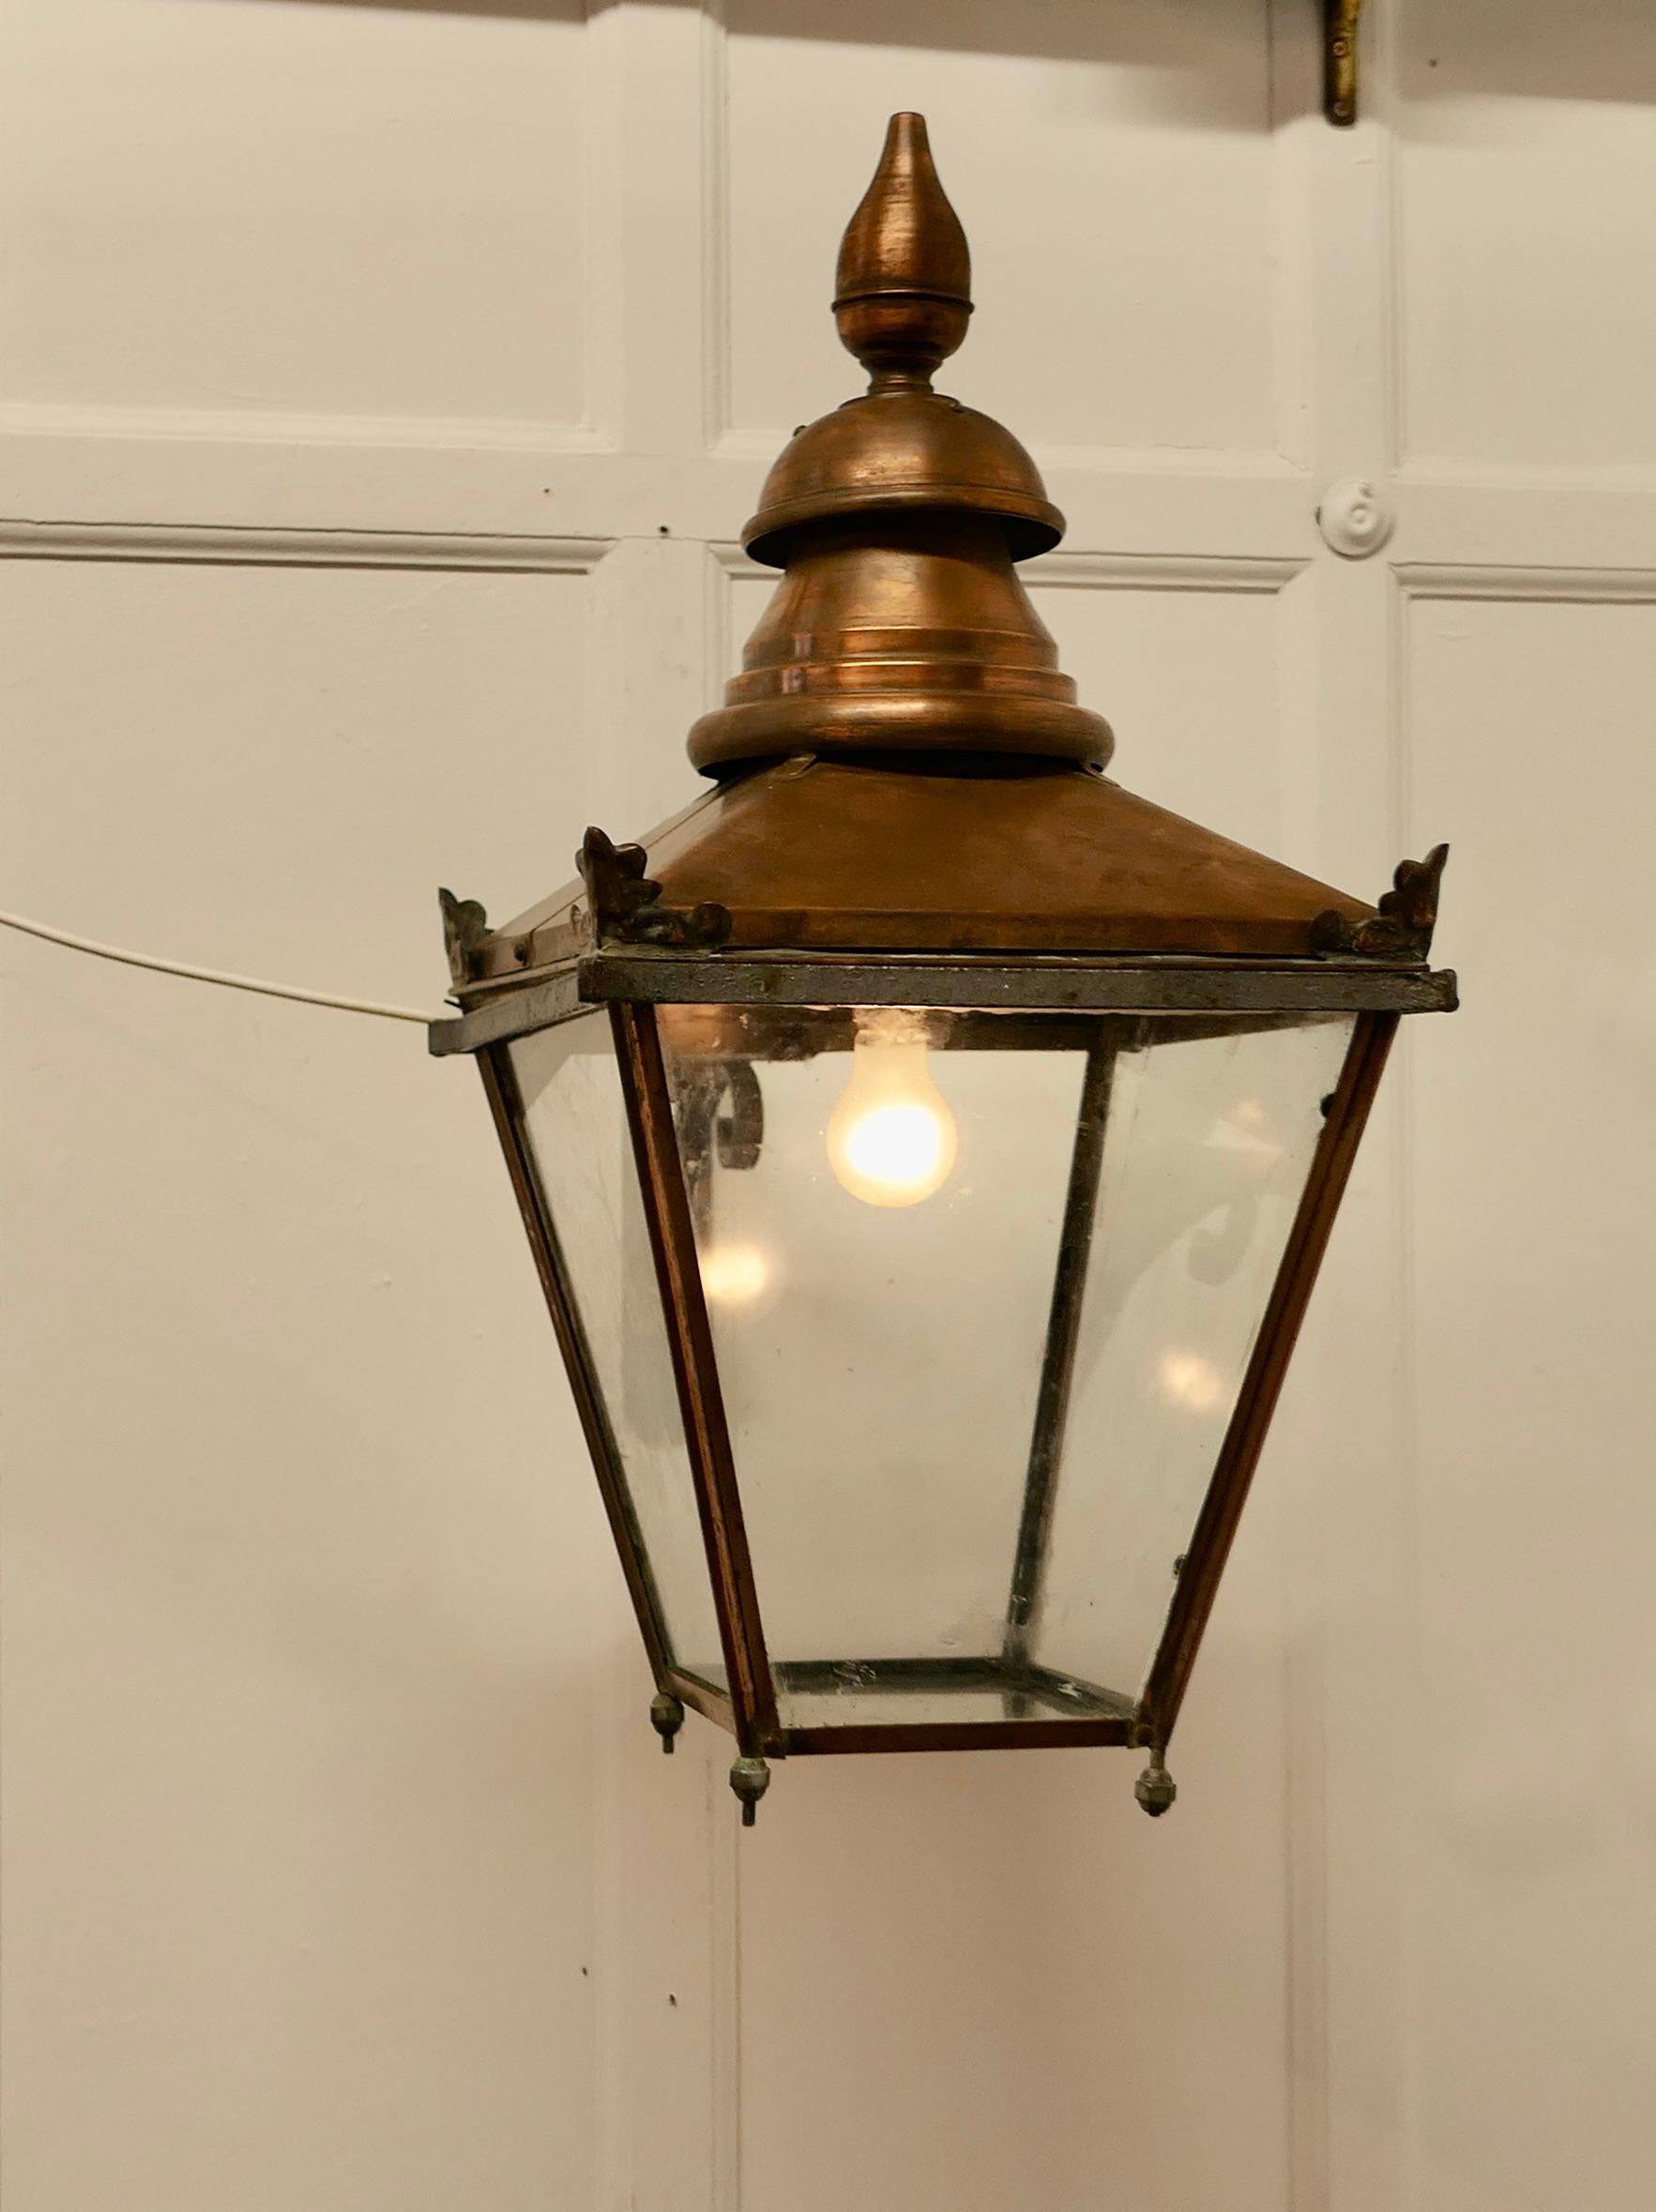 Large Copper Wall Hanging Lantern  

This is a Large Copper street light style Wall Lantern it has a natural oxidised patina, it has glazed sides and at the bottom and it hangs on an iron wall fitting bracket
The copper is old and has a great